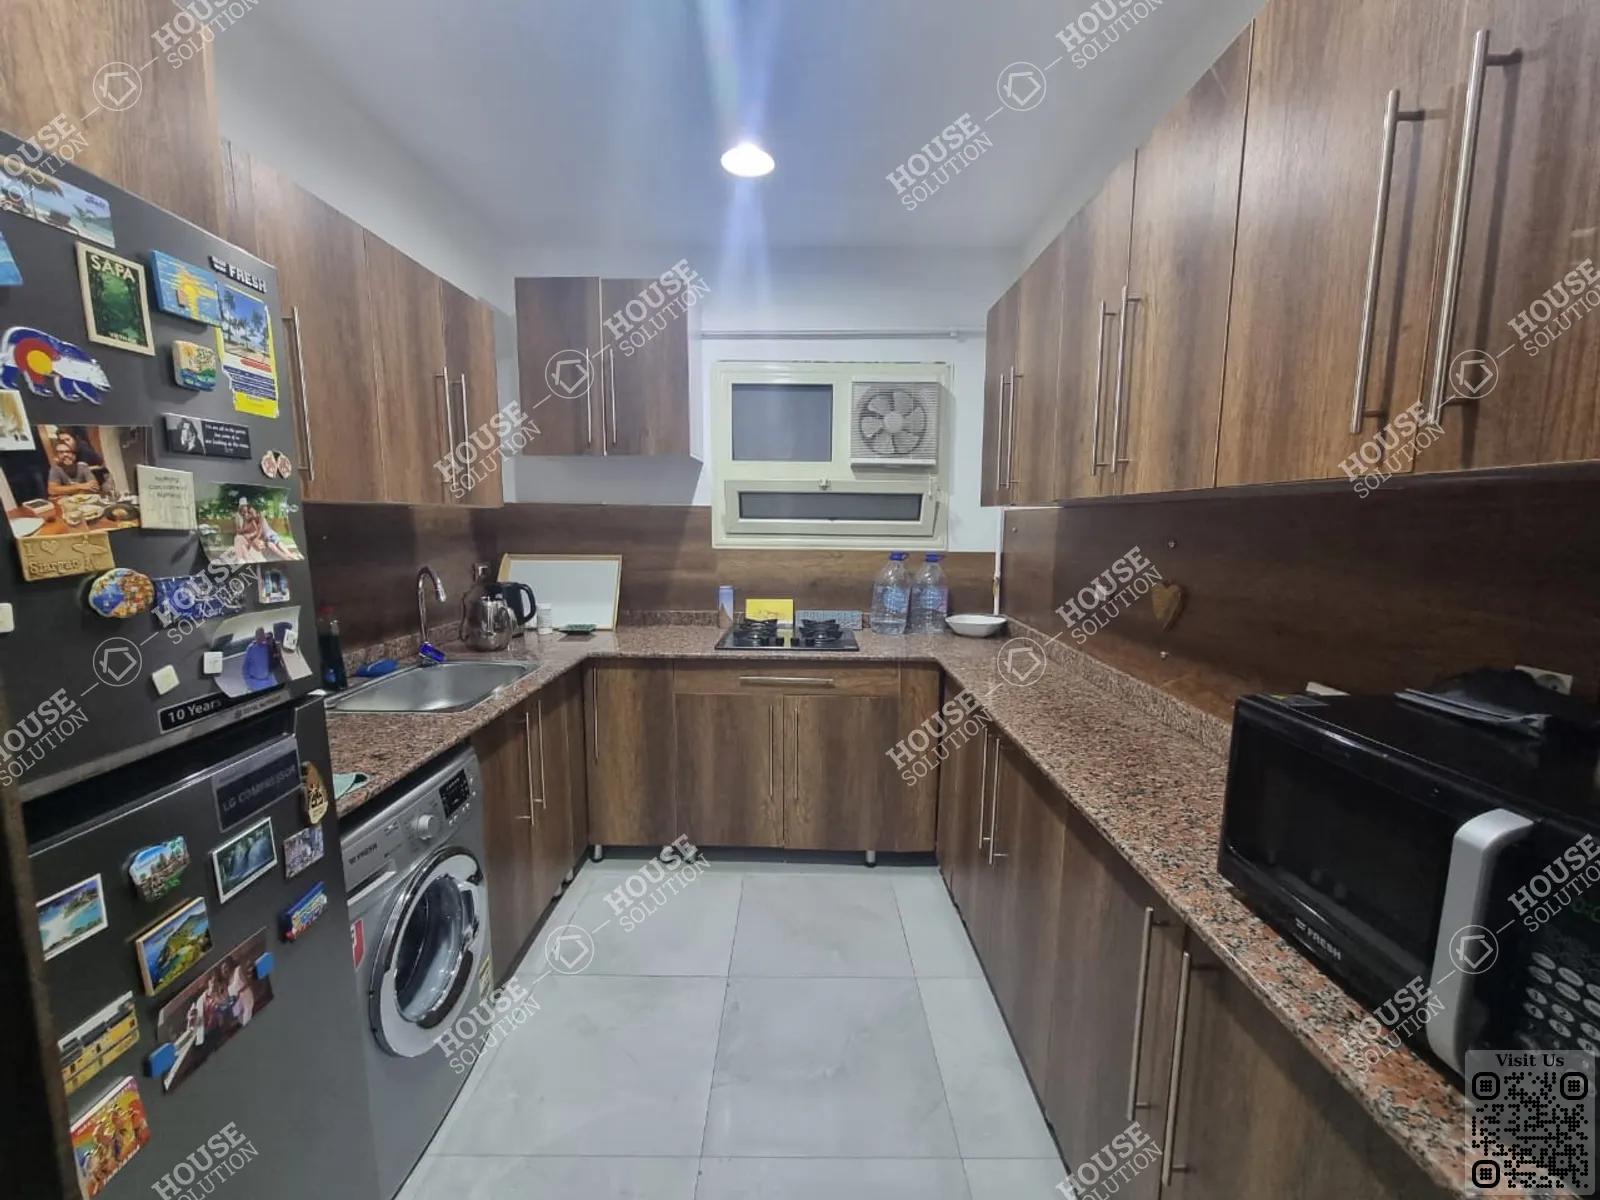 KITCHEN  @ Apartments For Rent In Maadi Maadi Degla Area: 150 m² consists of 2 Bedrooms 2 Bathrooms Modern furnished 5 stars #5612-2